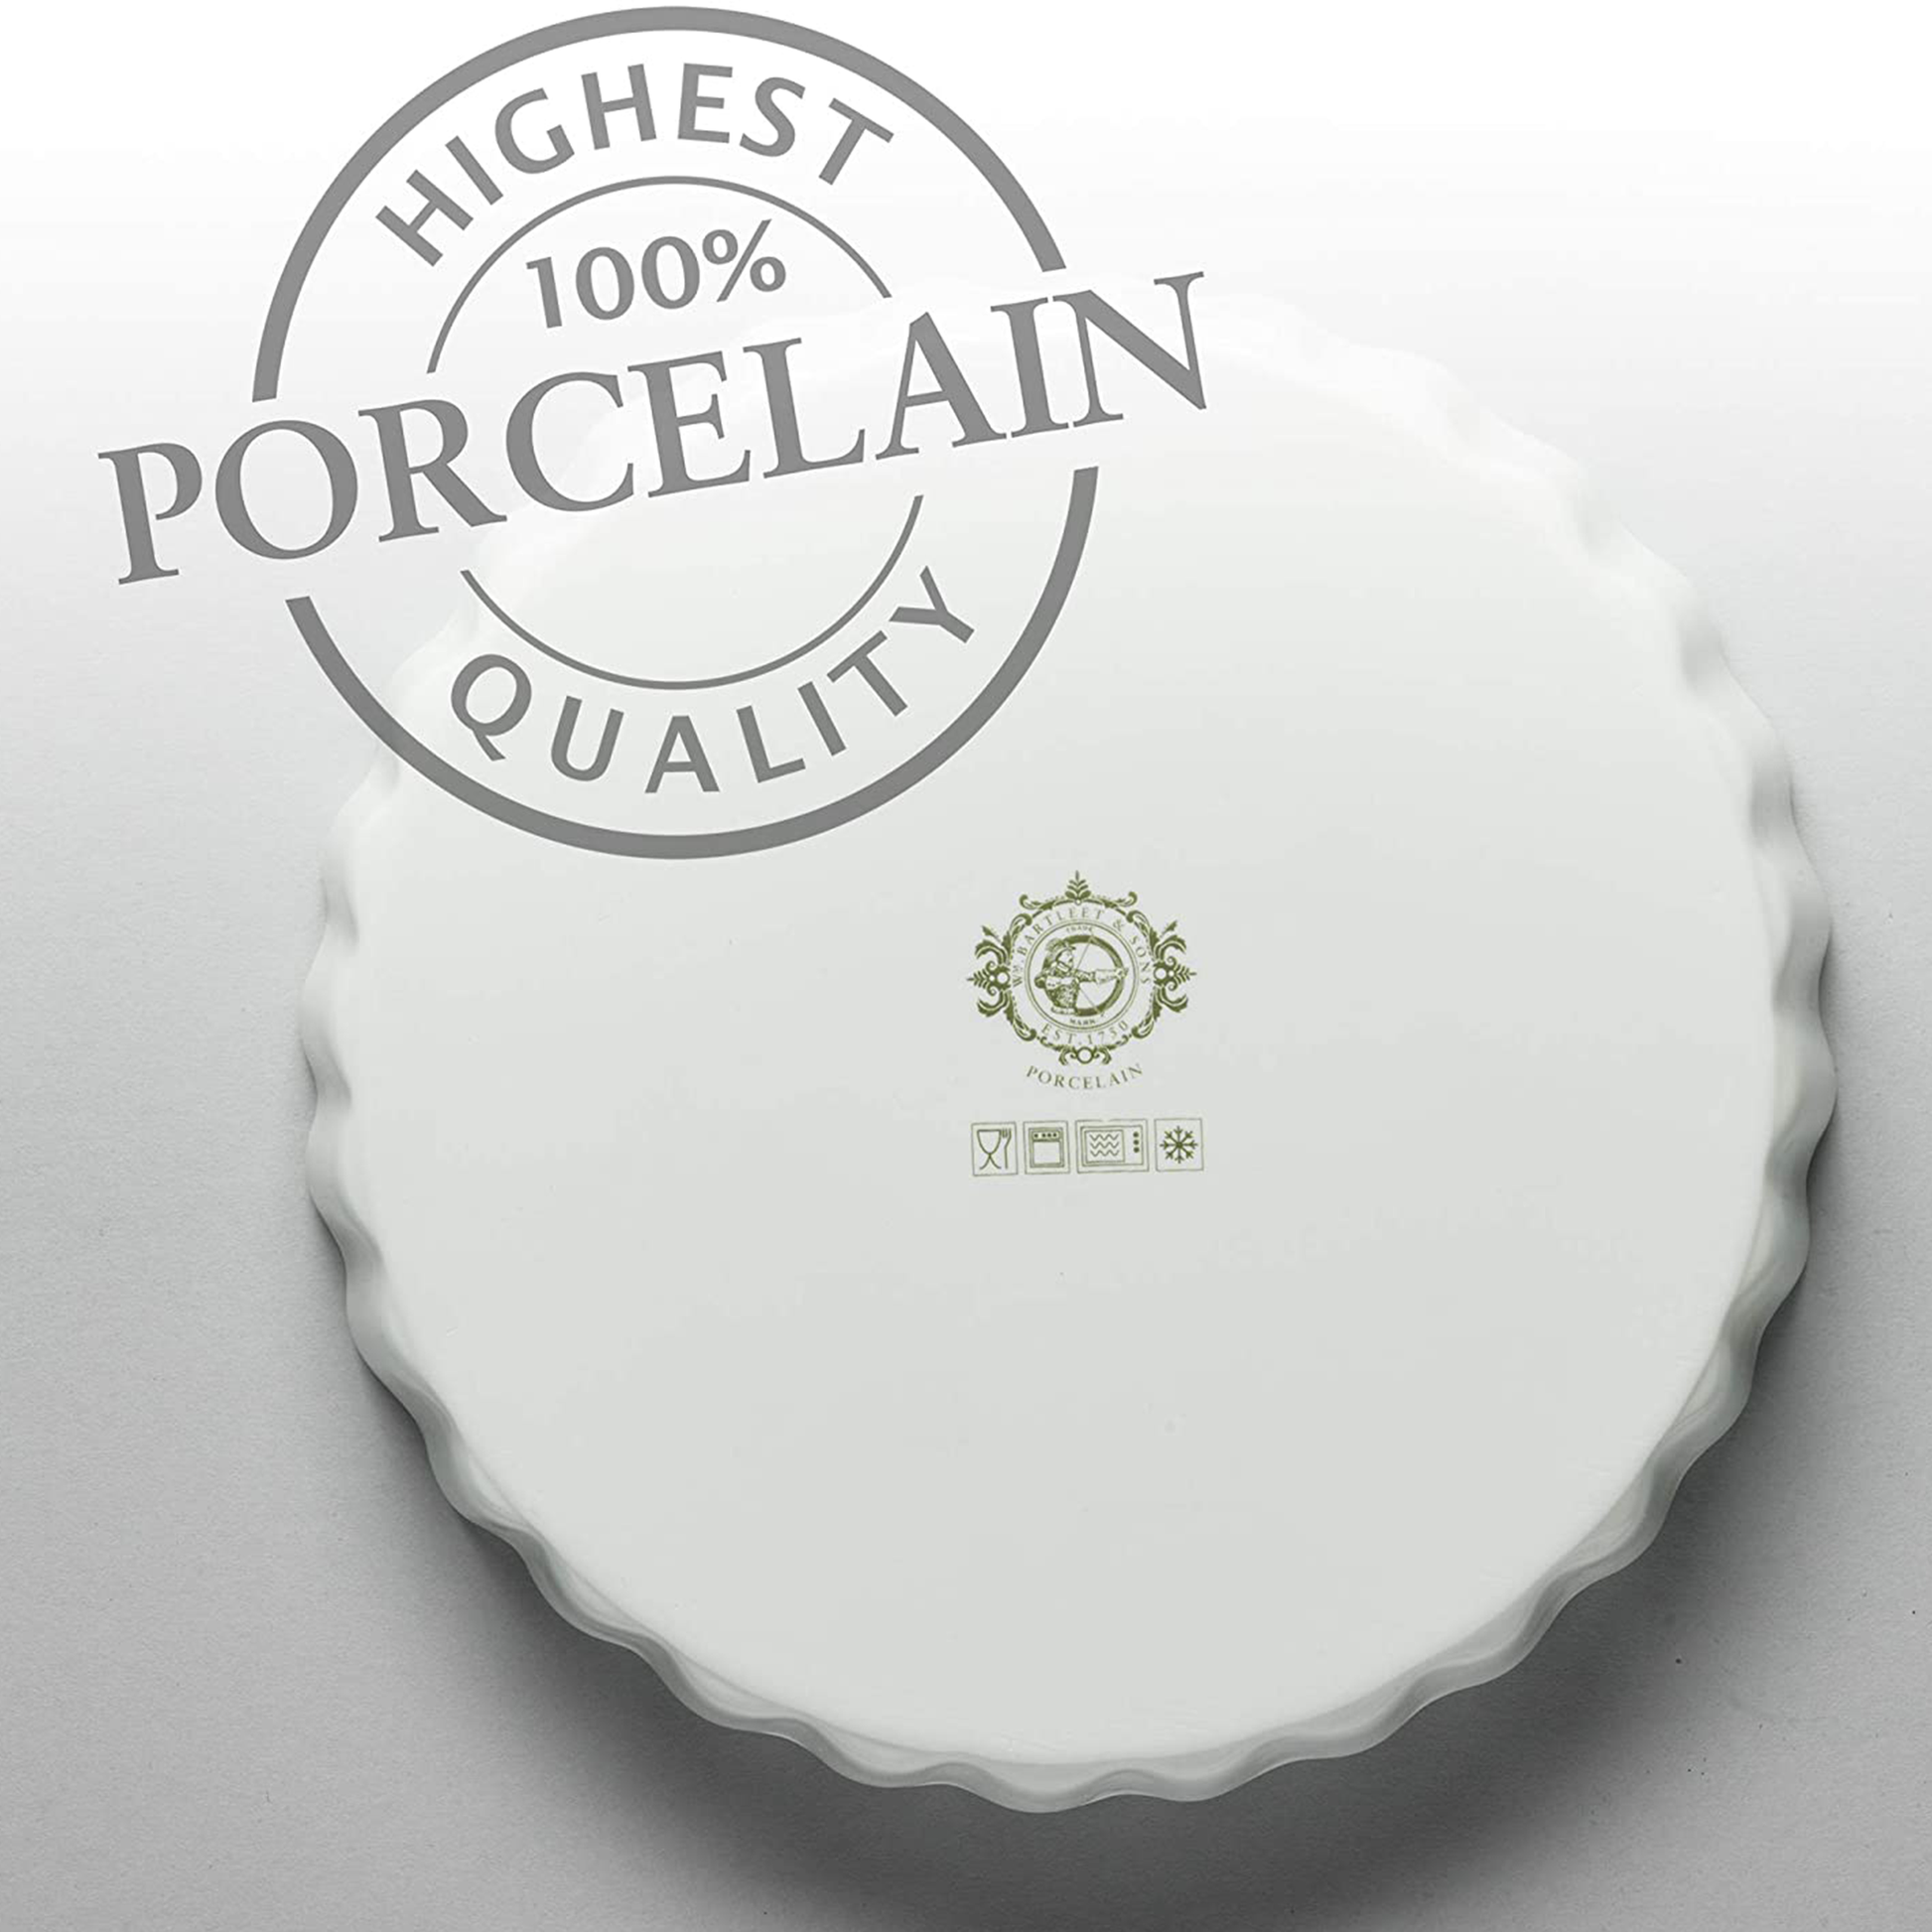 the porcelian stamp on the back of the dish